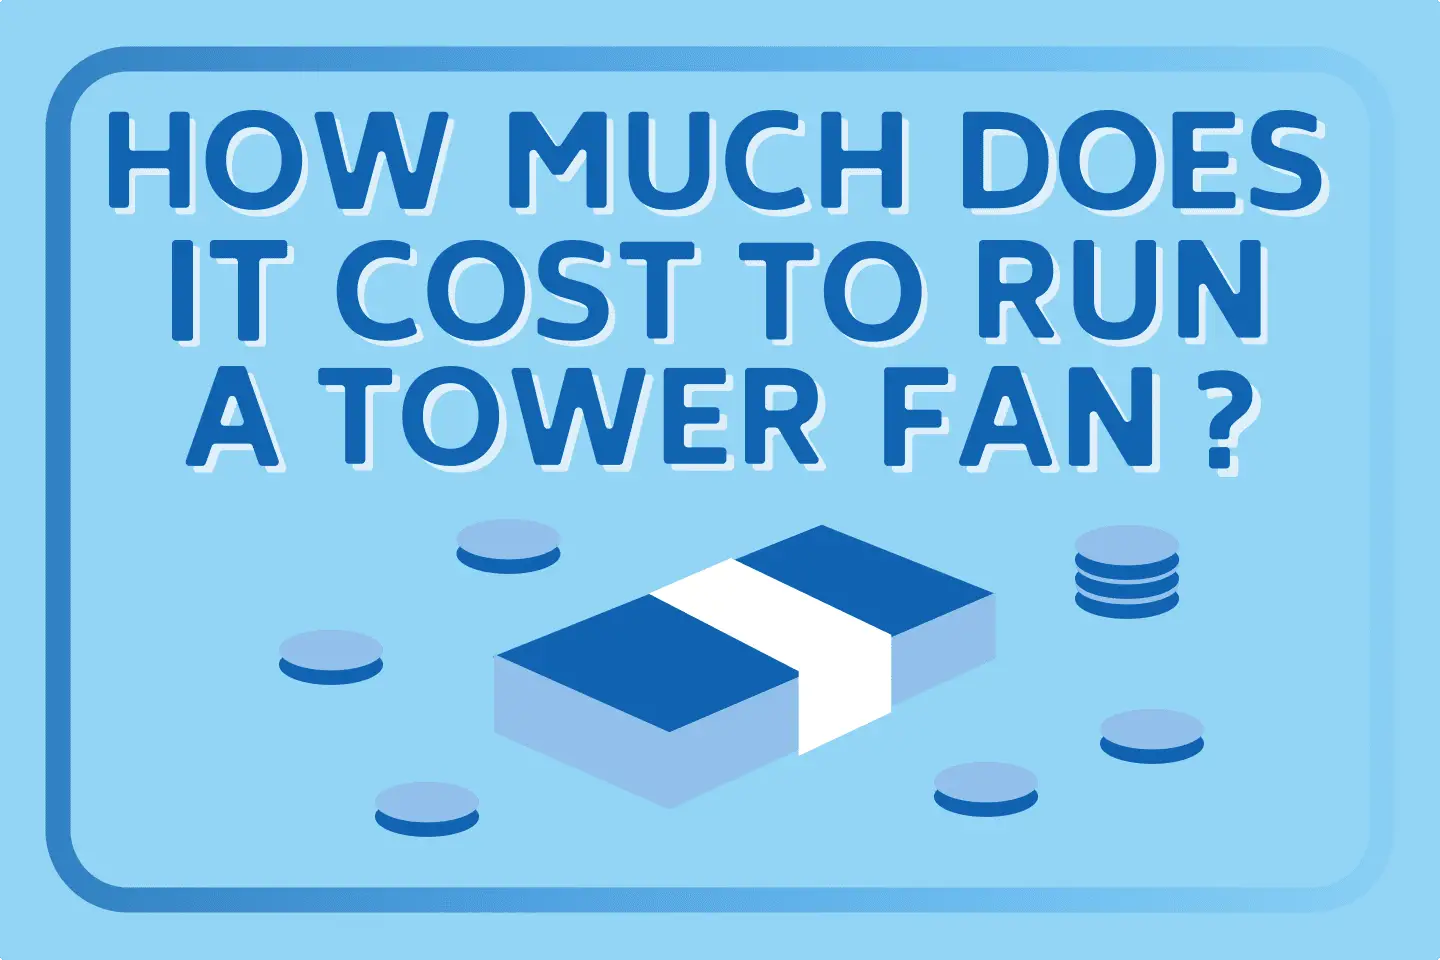 How Much Does It Cost to Run a Tower Fan?